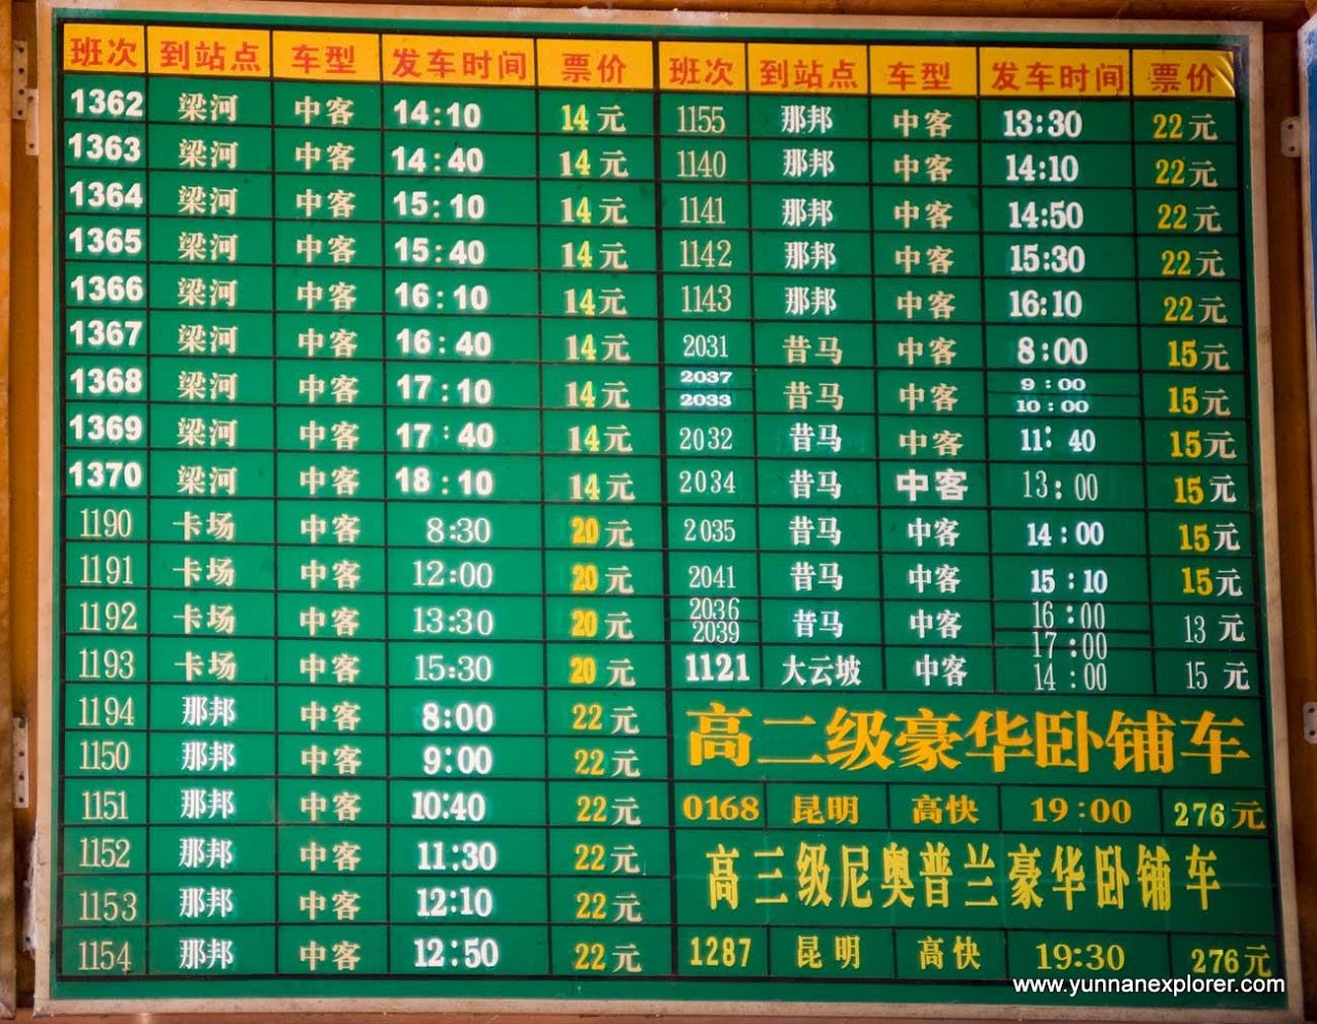 Picture: Busses to Tengchong, Lianghe, Mangshi, Ruili, Kunming and some local destinations. 